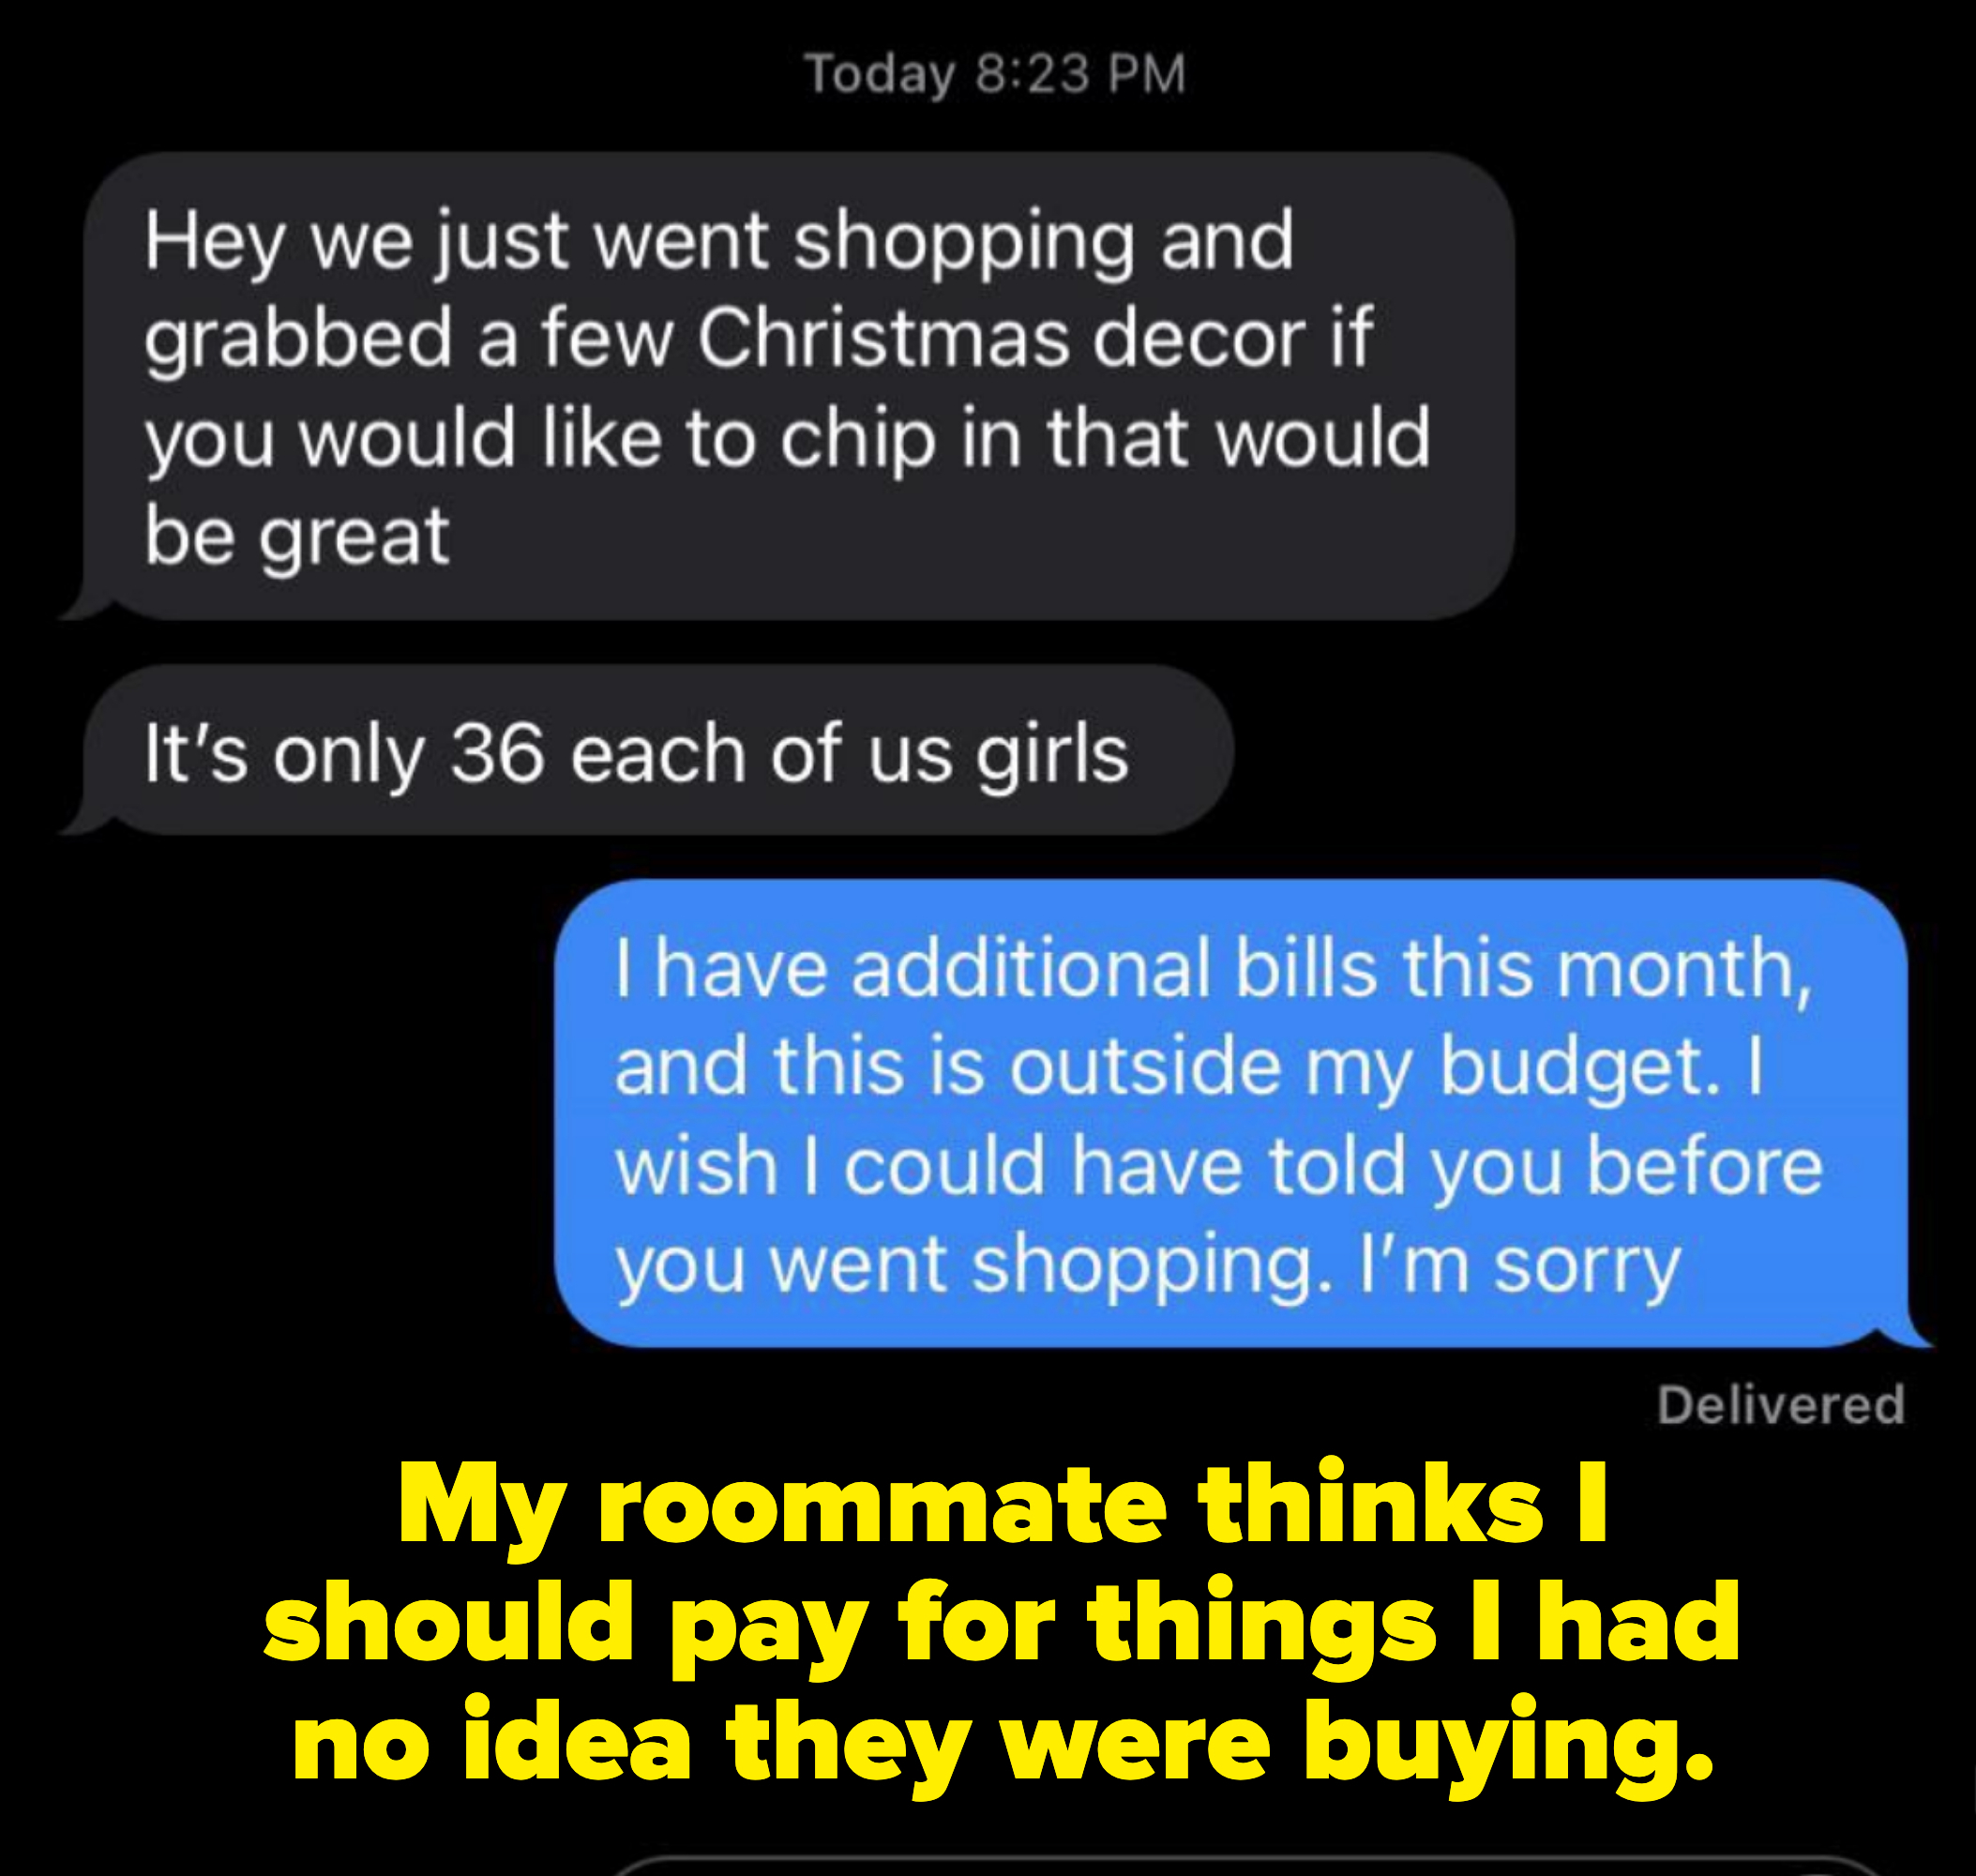 text messages exchanged about new christmas decor bought